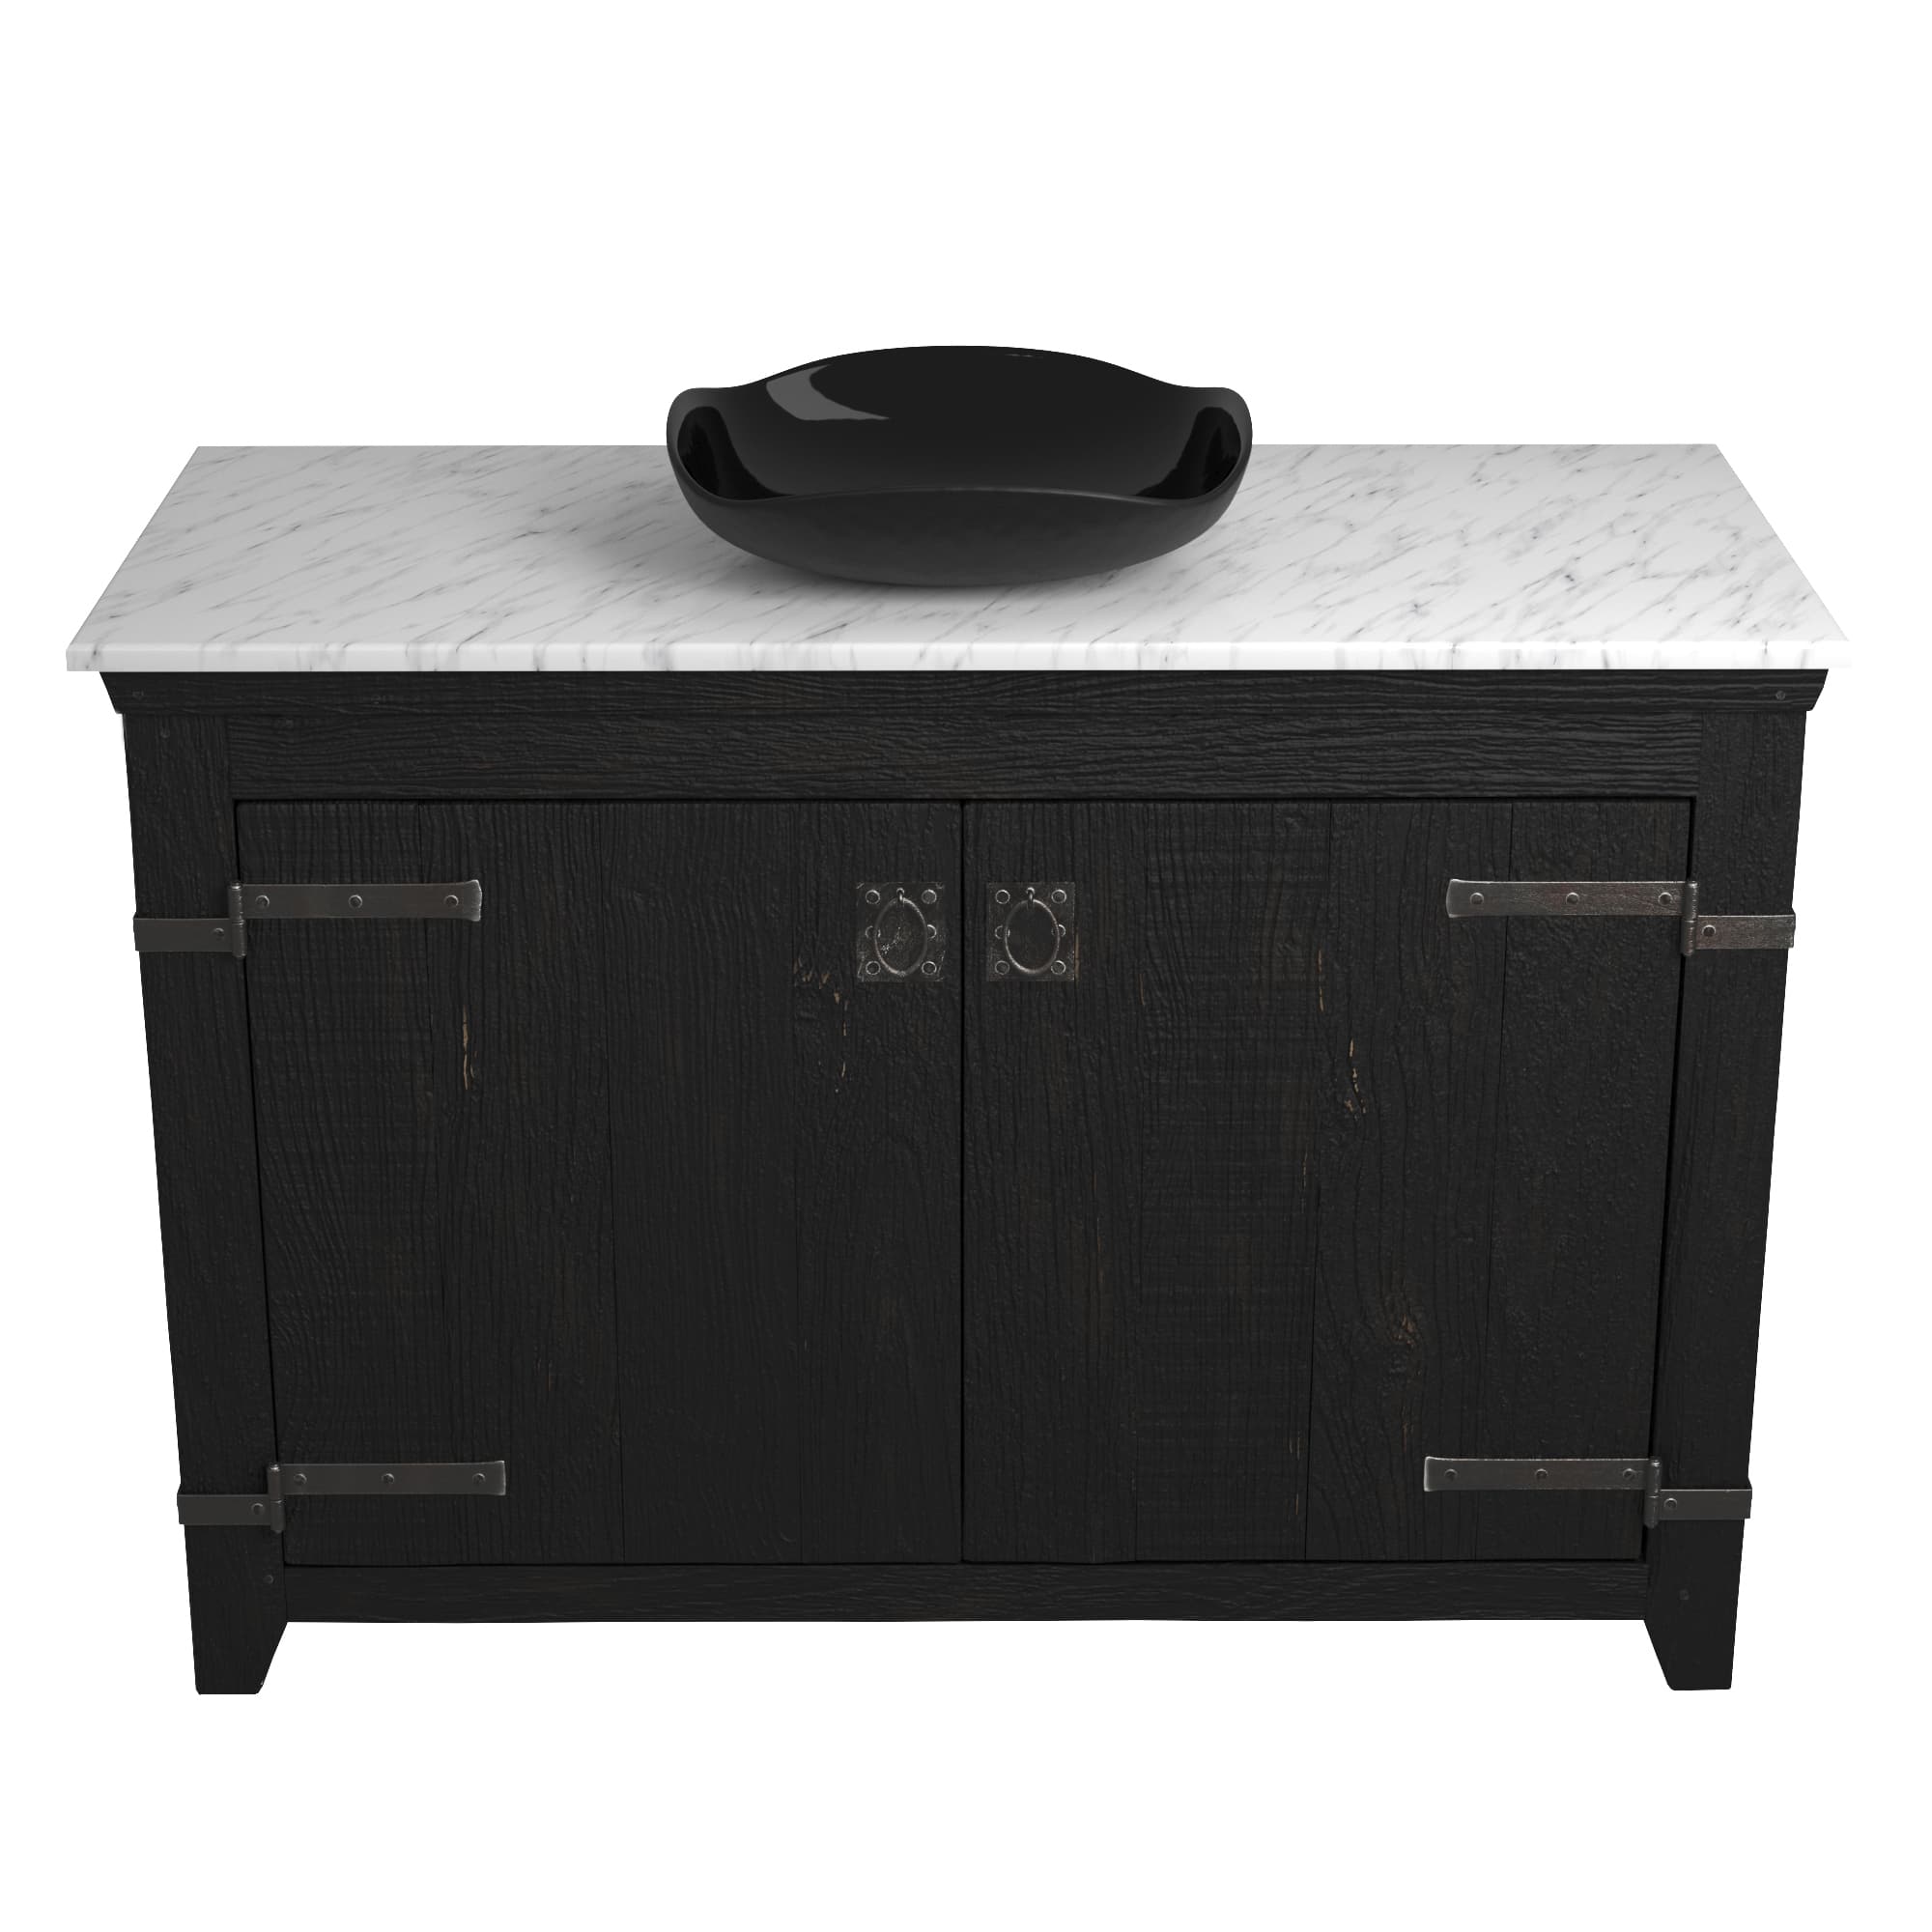 Native Trails 48" Americana Vanity in Anvil with Carrara Marble Top and Lido in Abyss, No Faucet Hole, BND48-VB-CT-MG-014